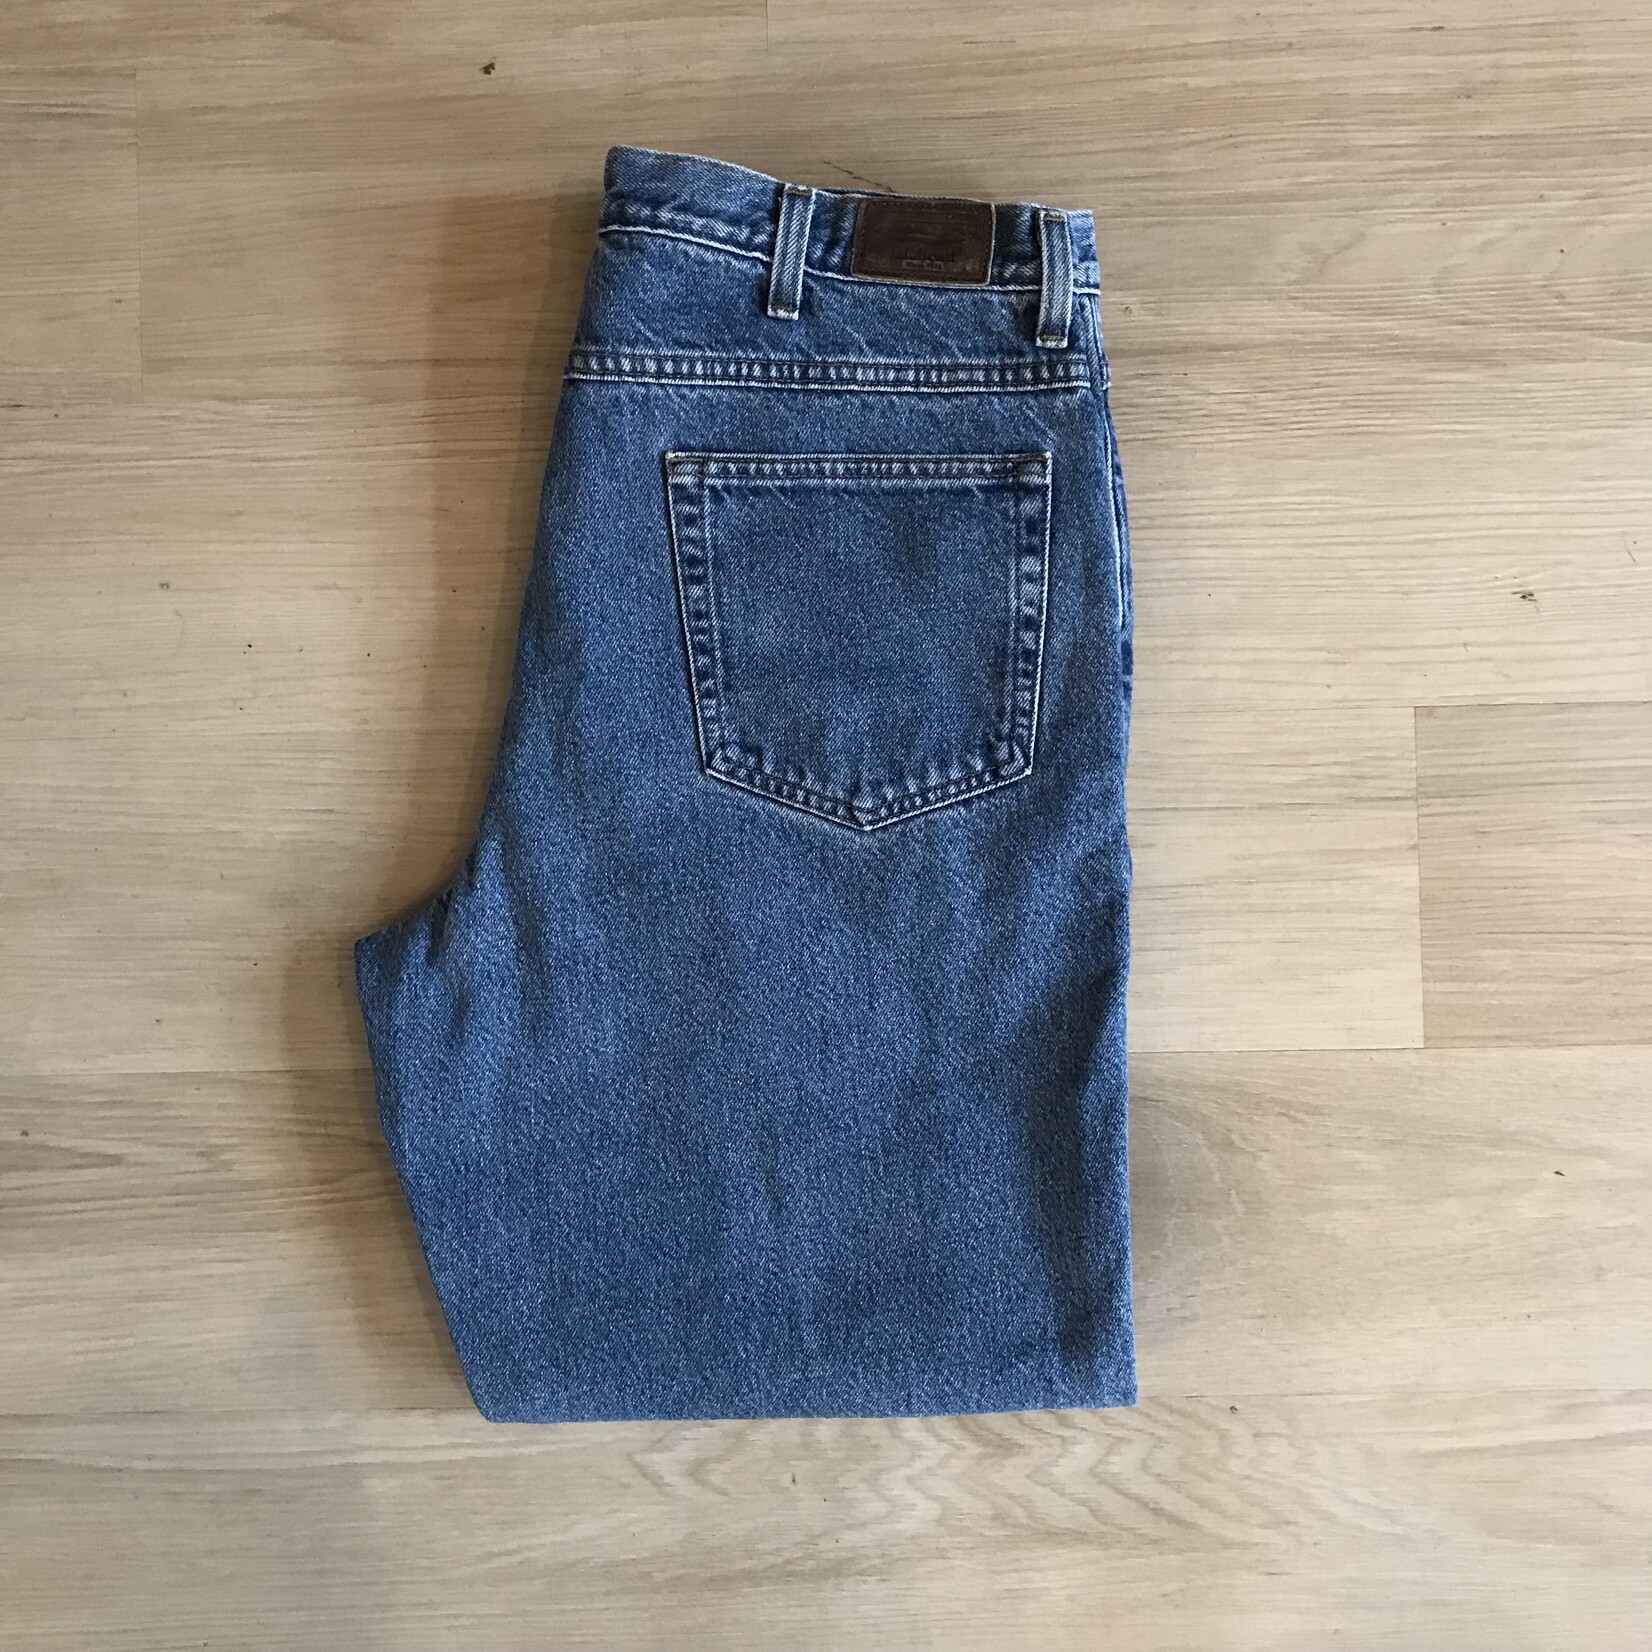 12095	ll bean flannel-lined jeans sz 35 x 29